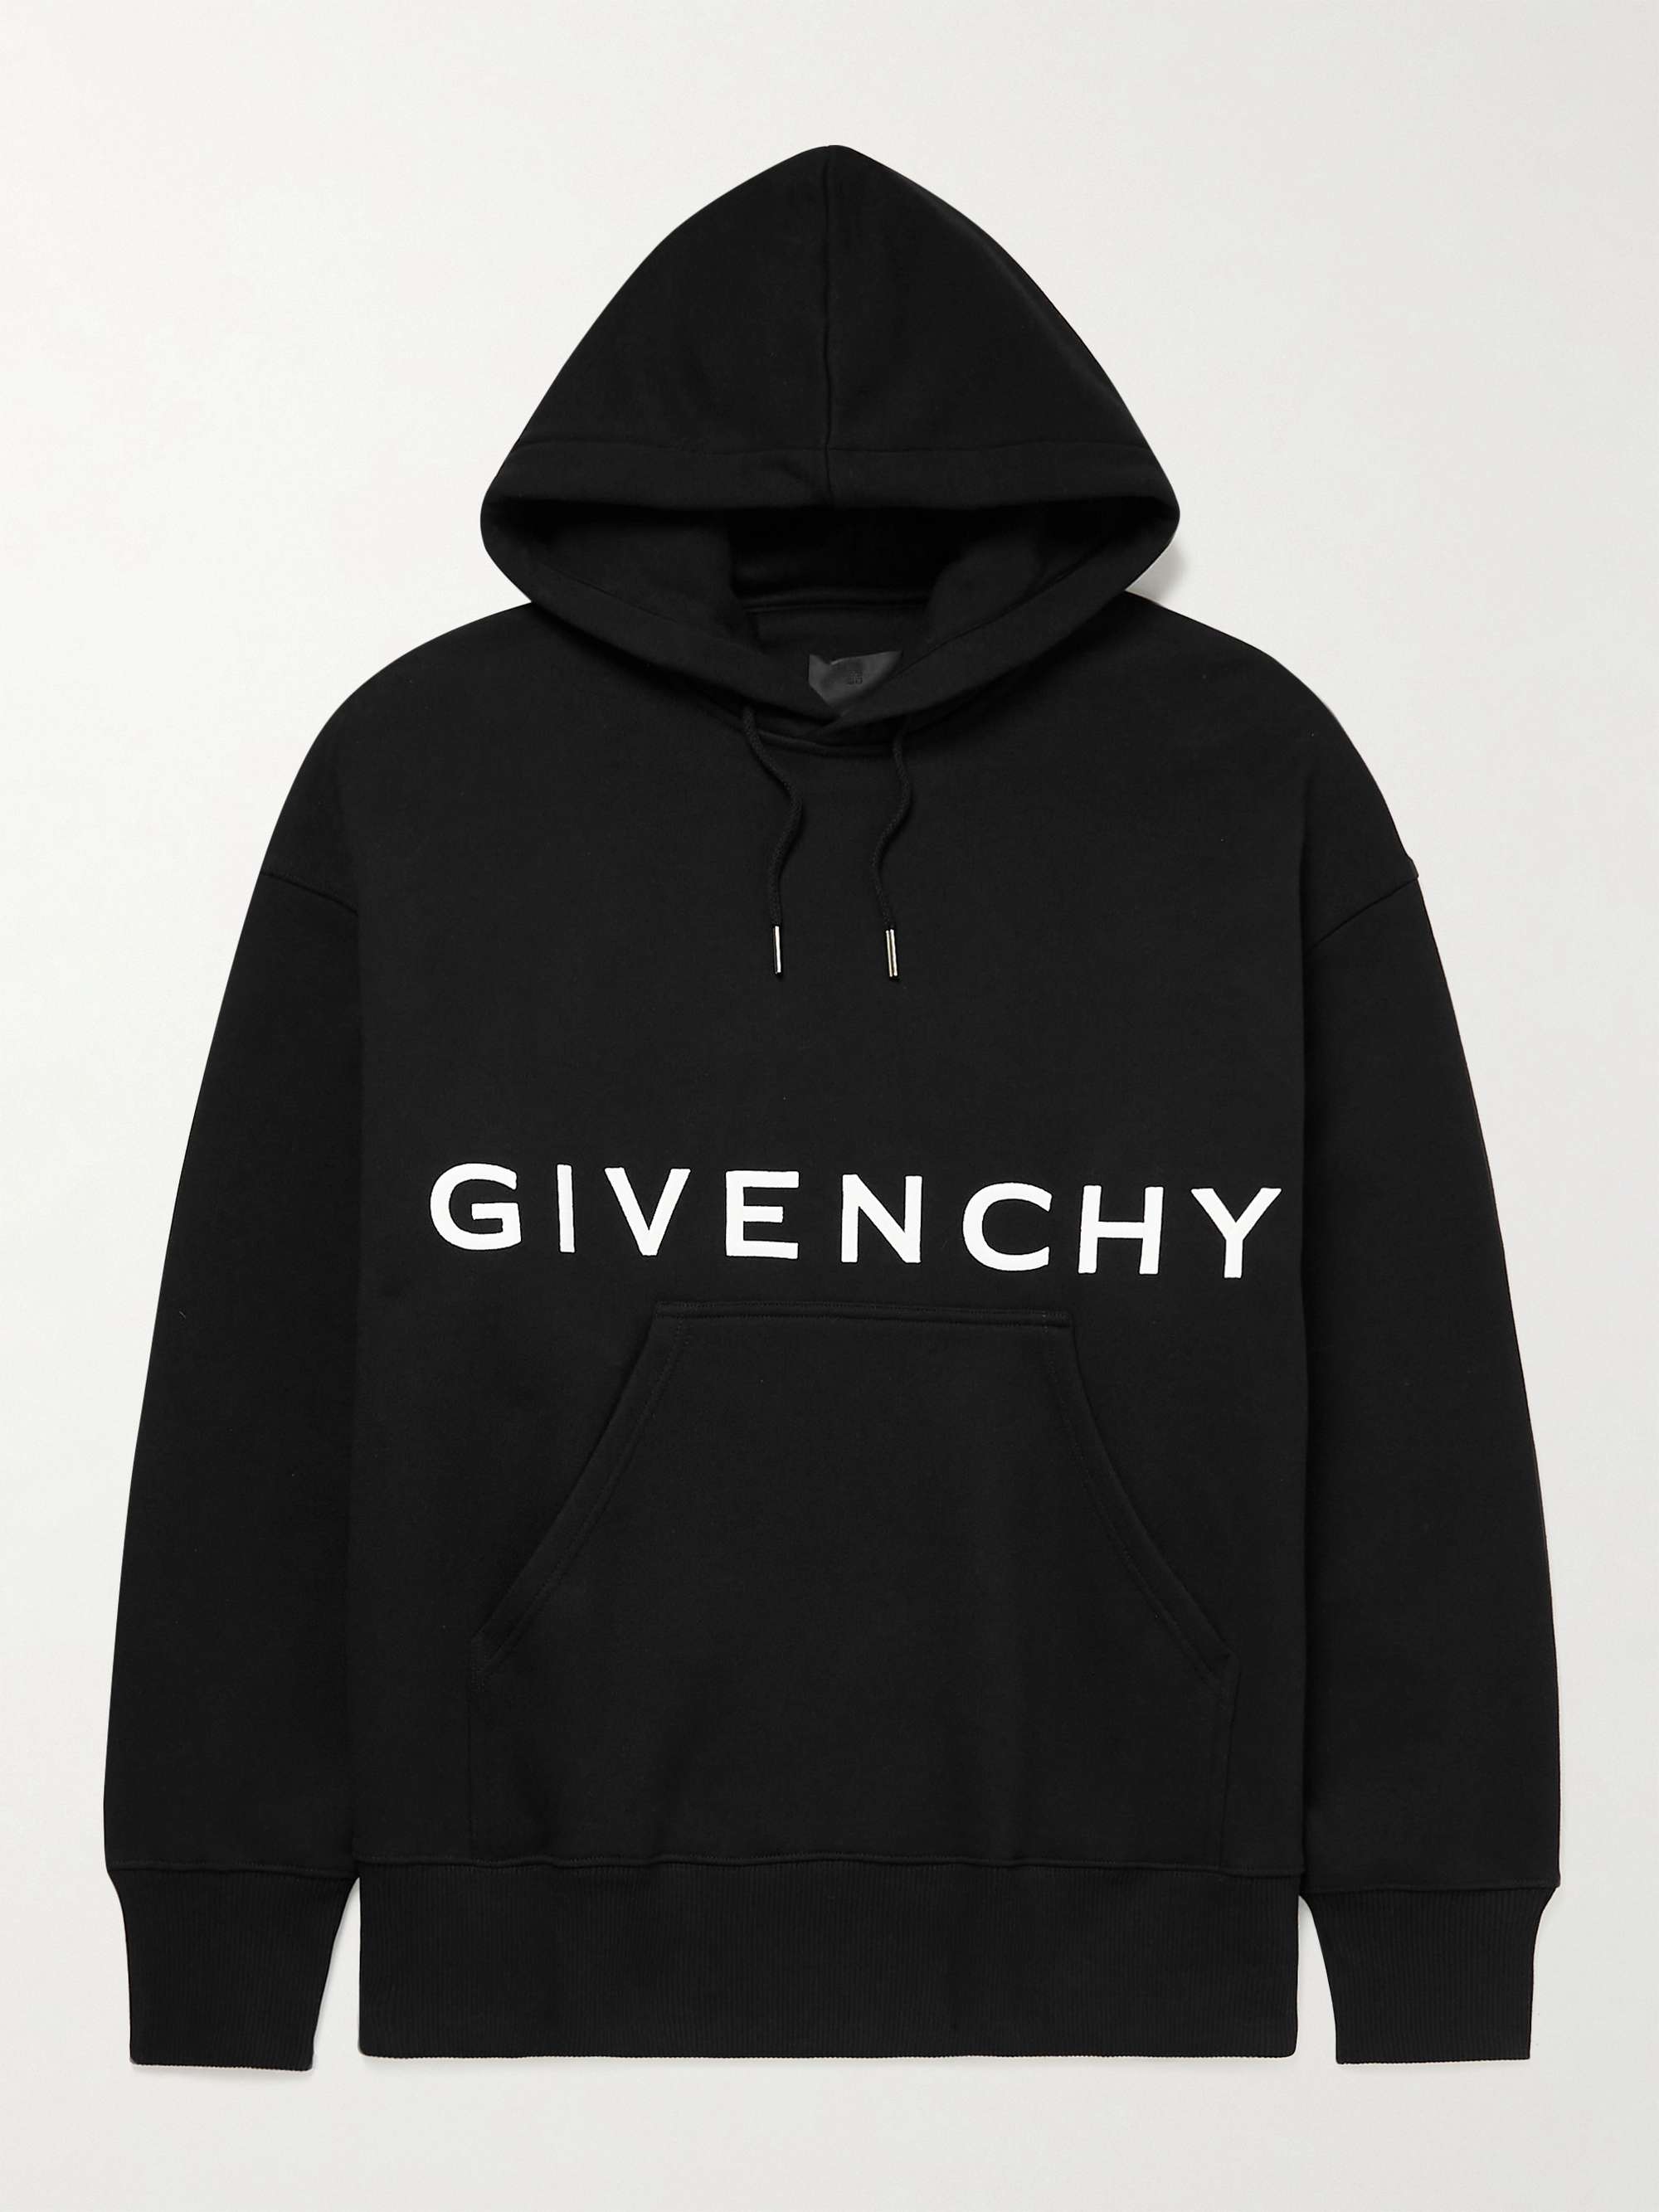 Top 86+ imagen black hoodie givenchy